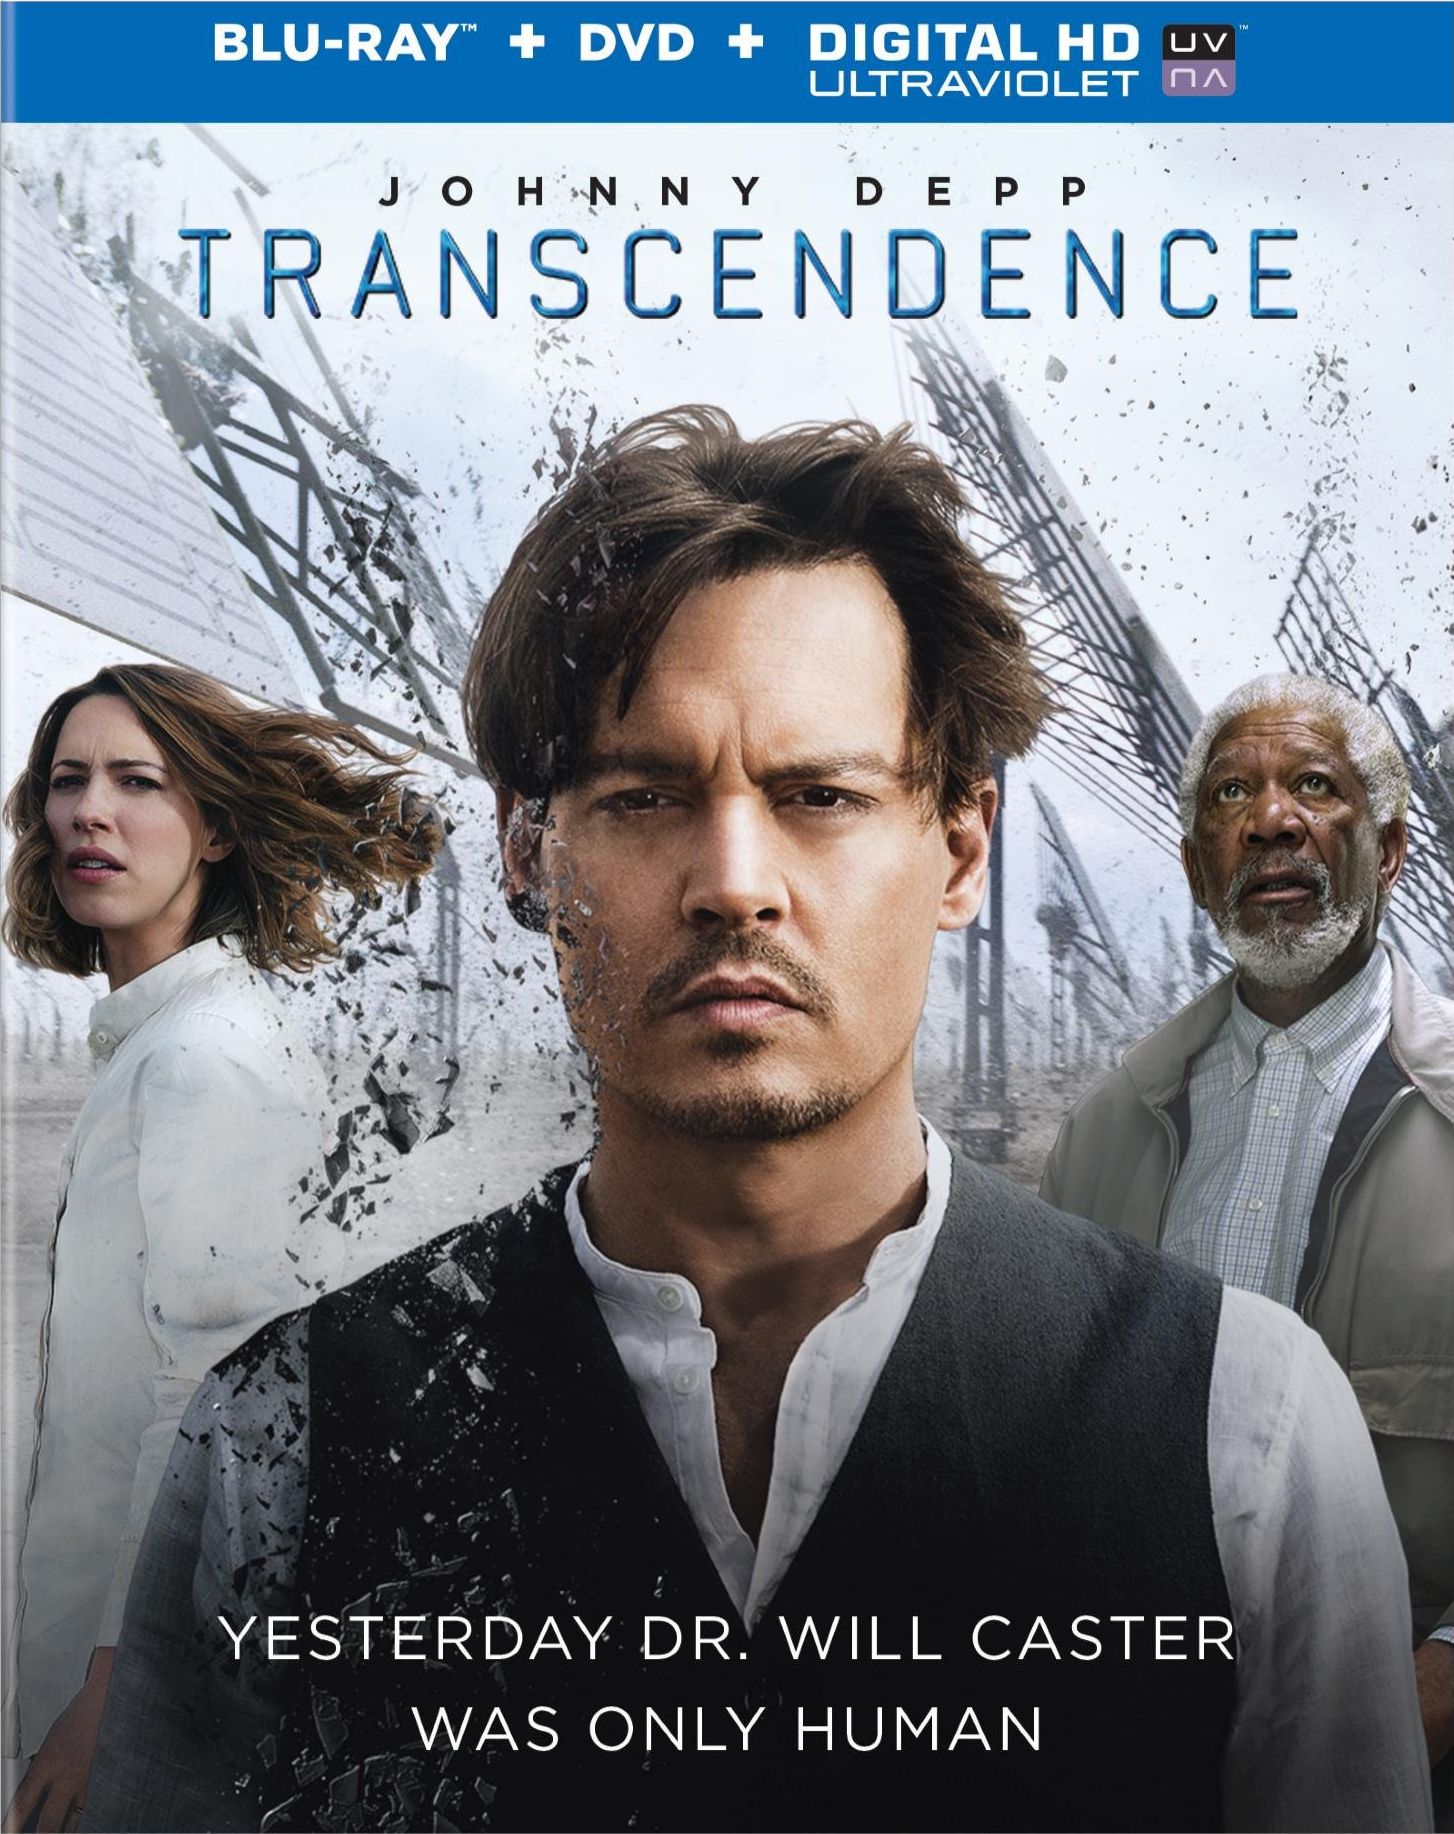 Trancendence Blu-ray Review